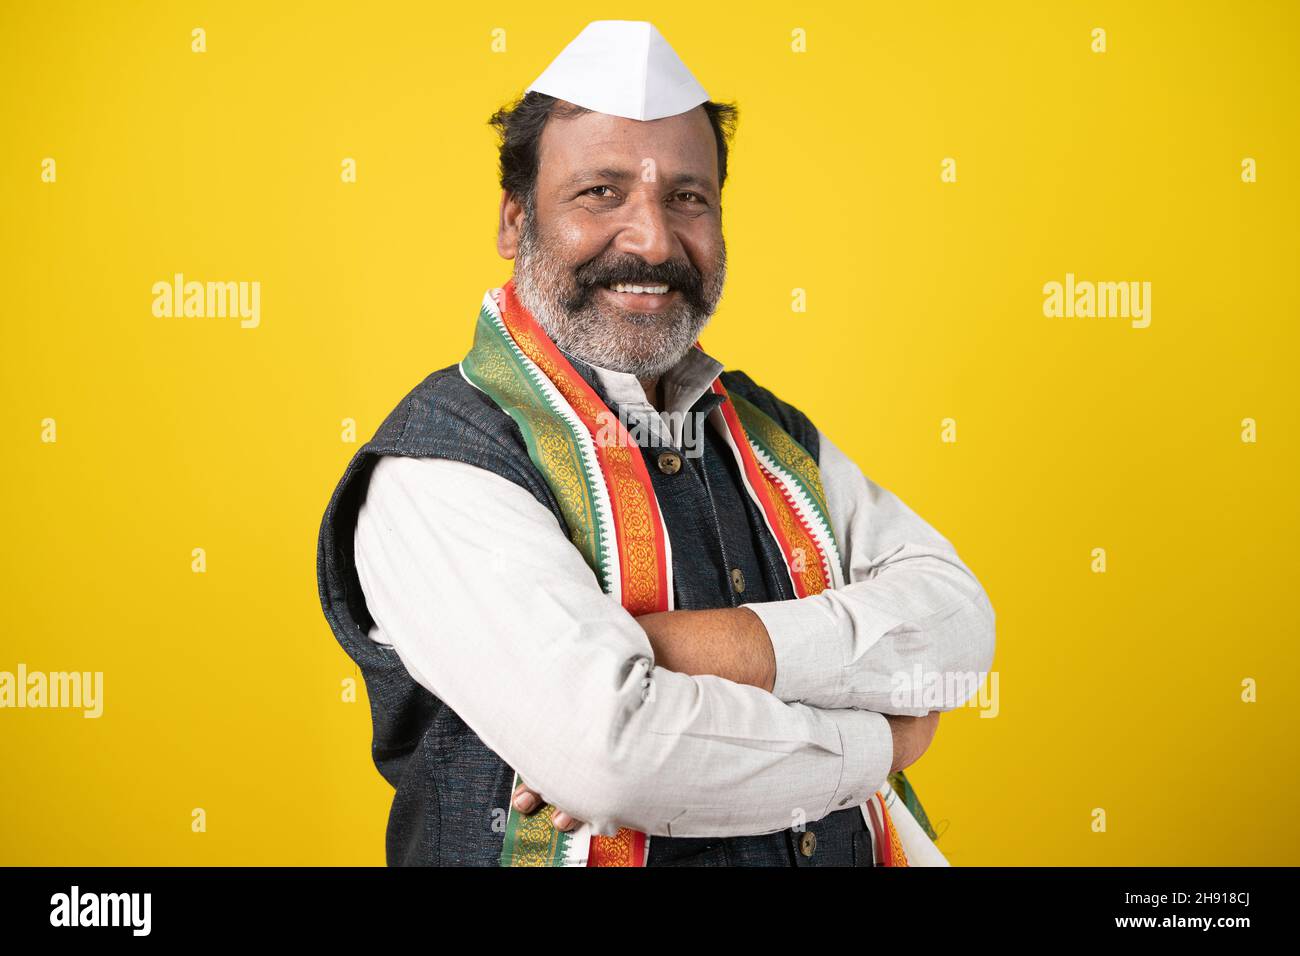 Confident senior politician looking at camera by crossing arms on yellow background - concept of positive expression and successful lawmaker or leader Stock Photo